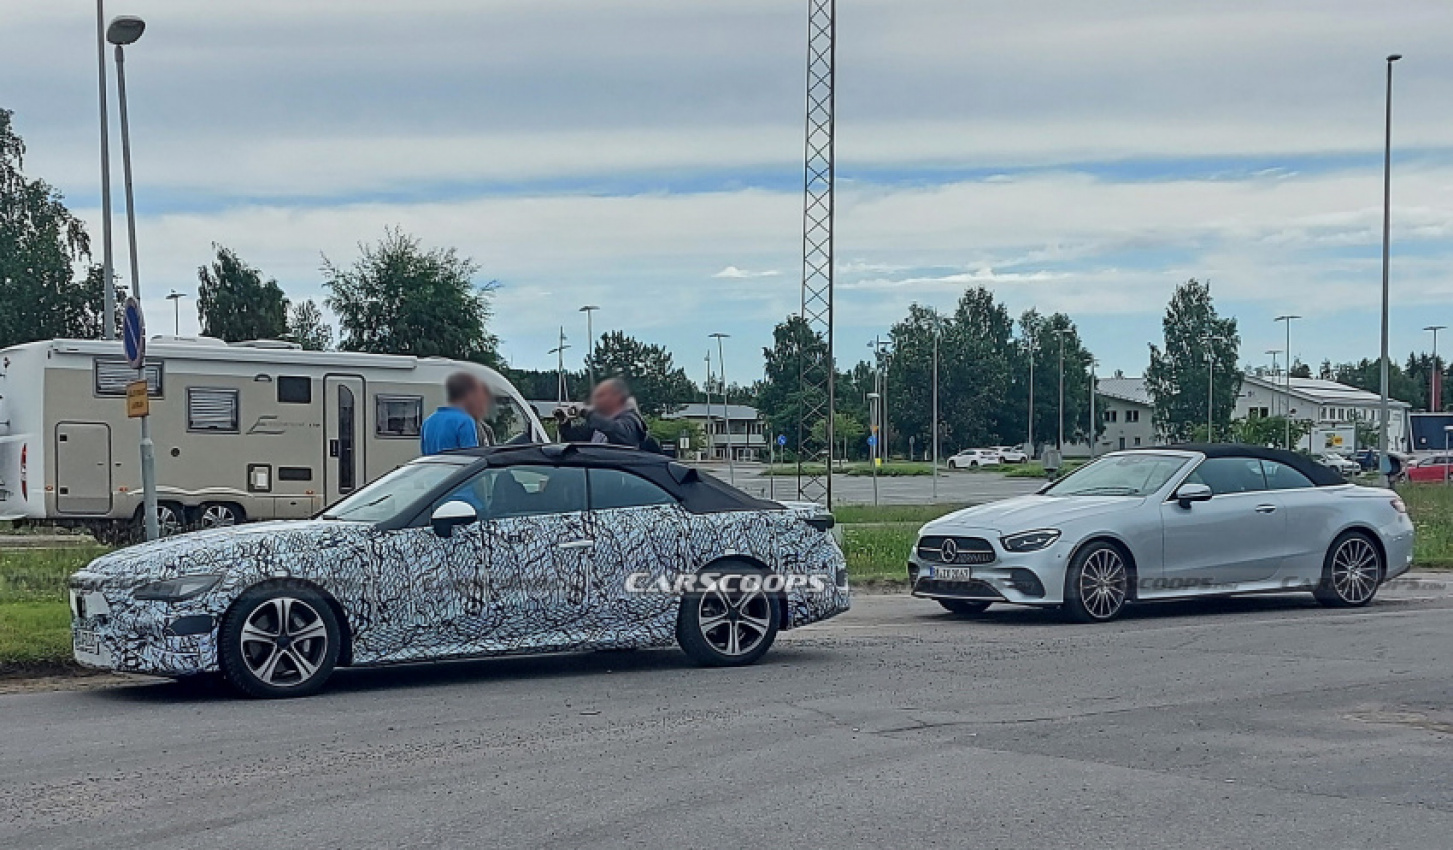 autos, cars, mercedes-benz, news, future cars, mercedes, mercedes cle, mercedes scoops, mercedes-amg, renderings, scoops, 2023 mercedes-benz cle: everything we know about the “one size fits all” coupe and cabriolet